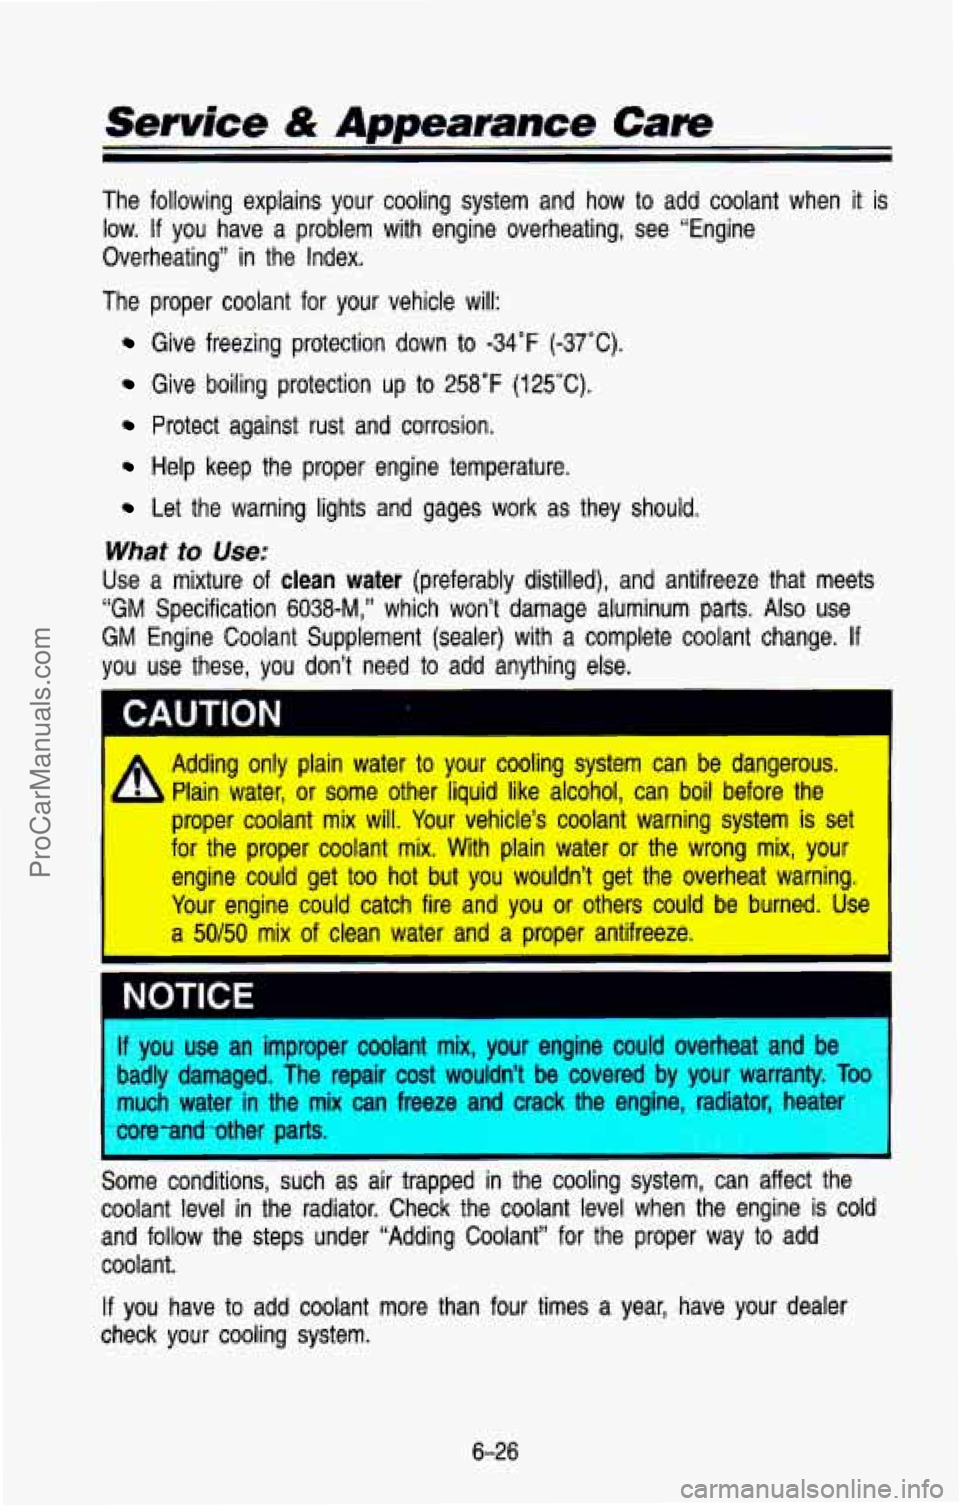 CHEVROLET SUBURBAN 1993  Owners Manual Service & Appearance Care 
The  following  explains  your  cooling  system  and  how  to  add  cool\
ant  when it is 
low. 
If you  have  a problem  with  engine  overheating,  see  “Engine 
Overhea